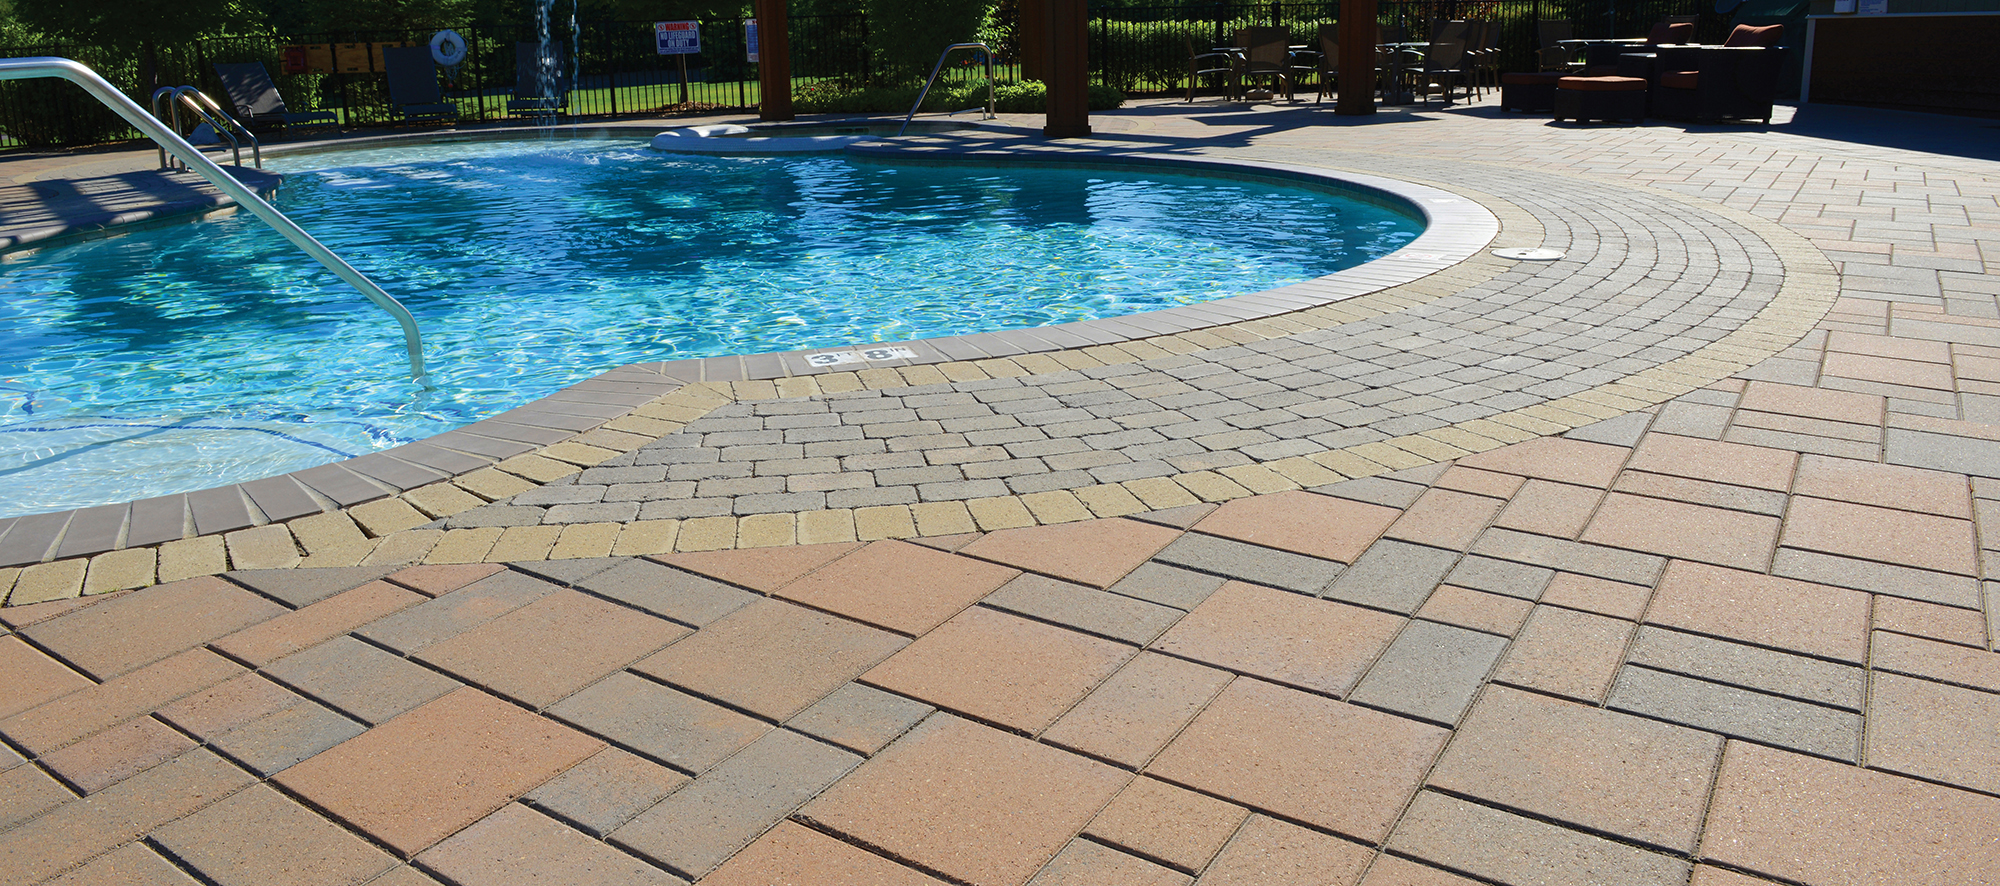 Around the pool, a warm blend of Unilock Brussels Block pavers in unique patterns make walking areas at Hearthside Grove Motorcoach Resort.